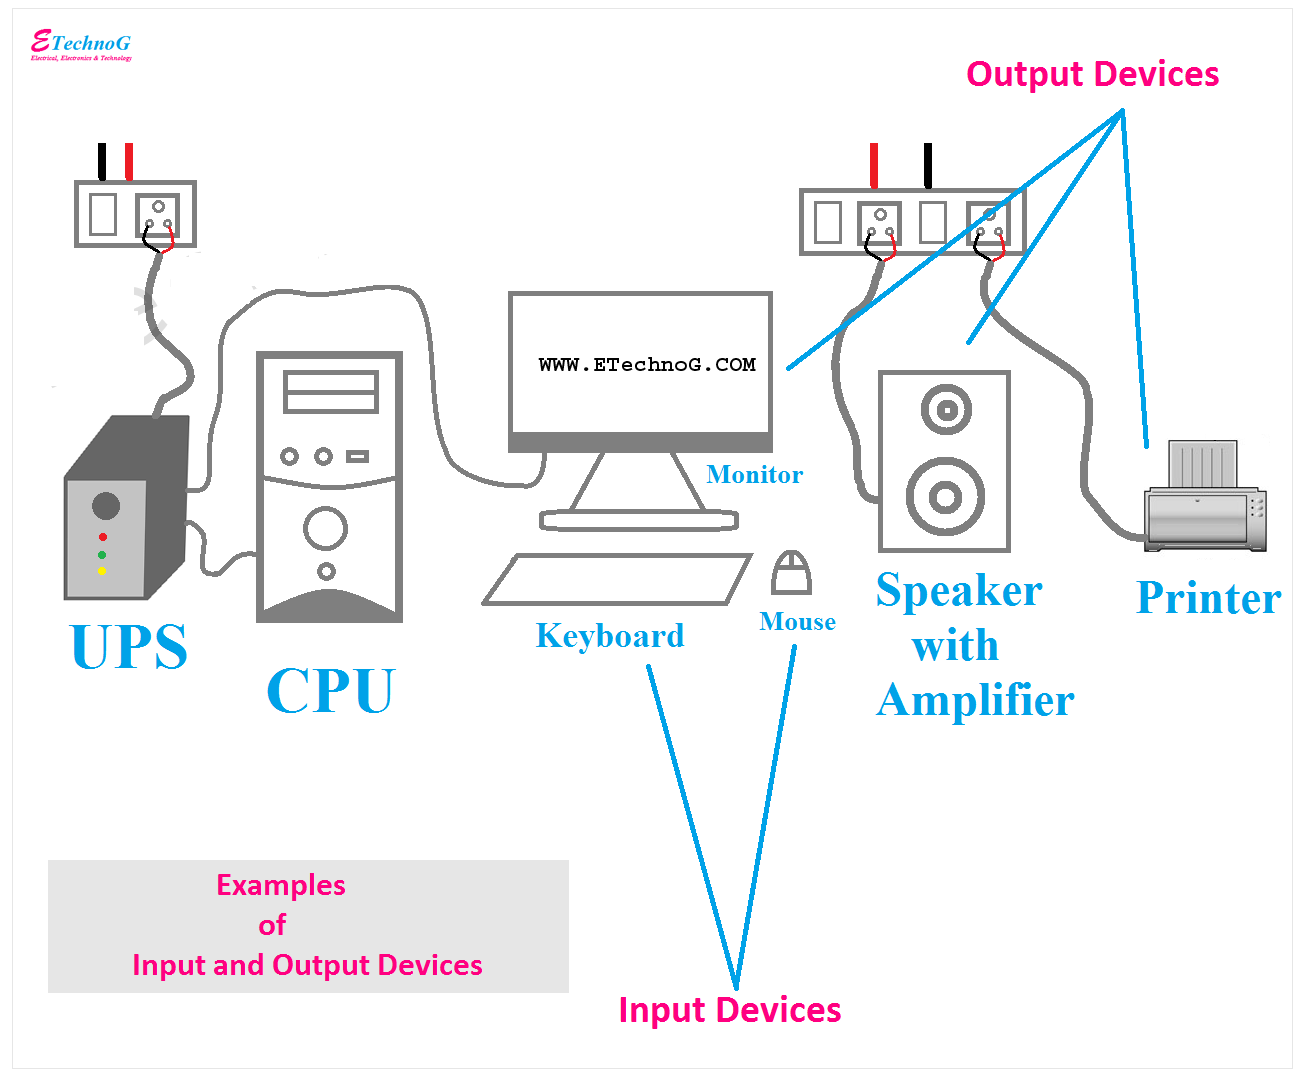 Practical Examples of Input and Output Devices